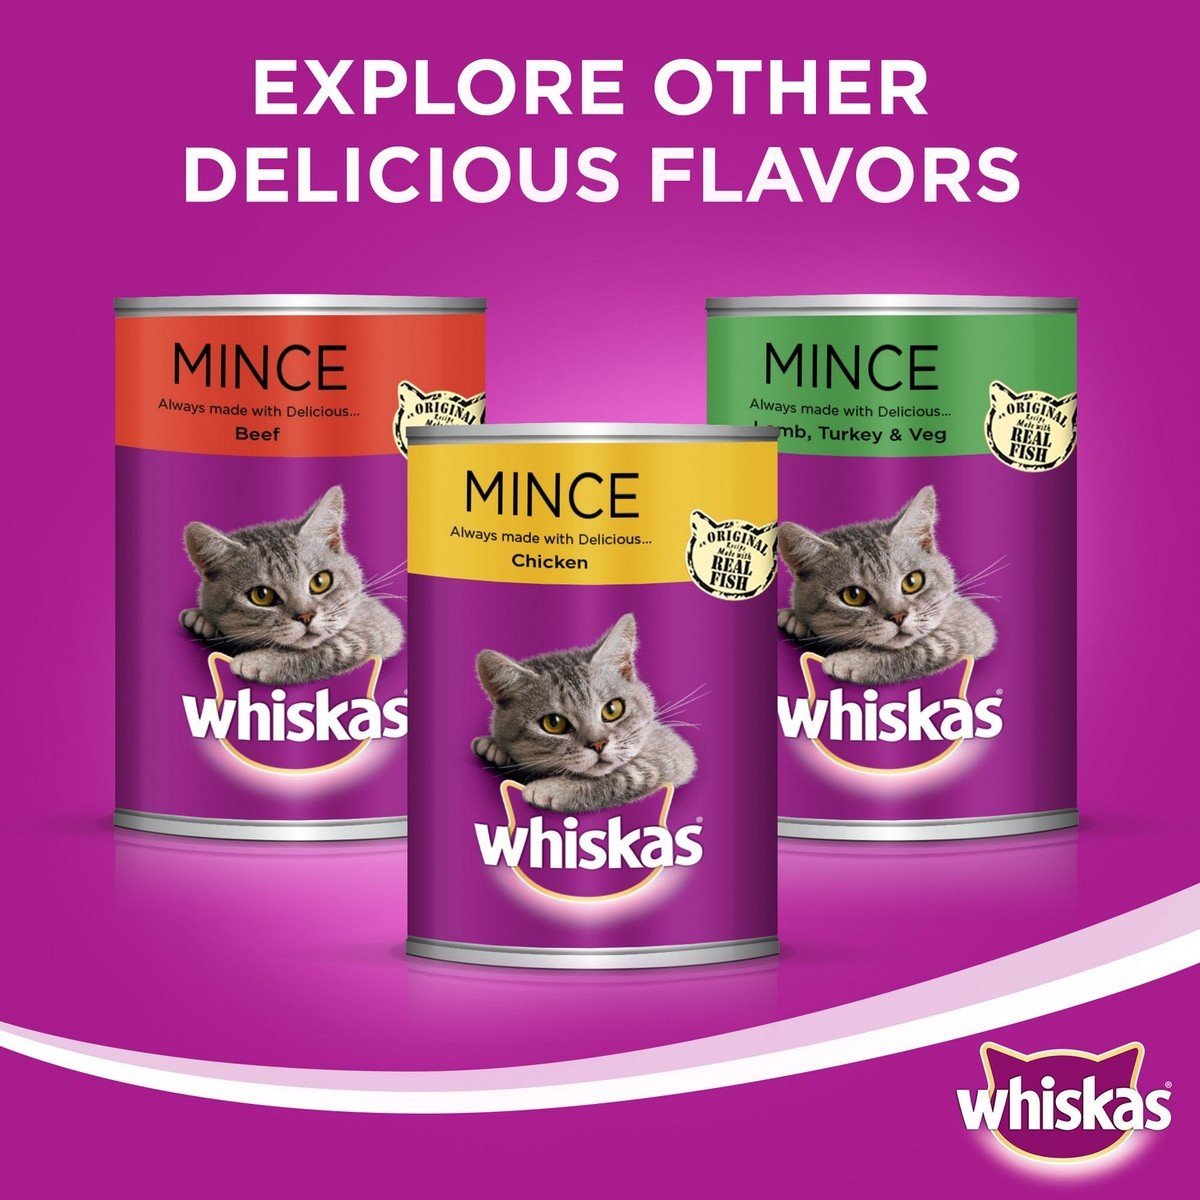 Whiskas® Mince Chicken and Veal in Loaf Can 400 g